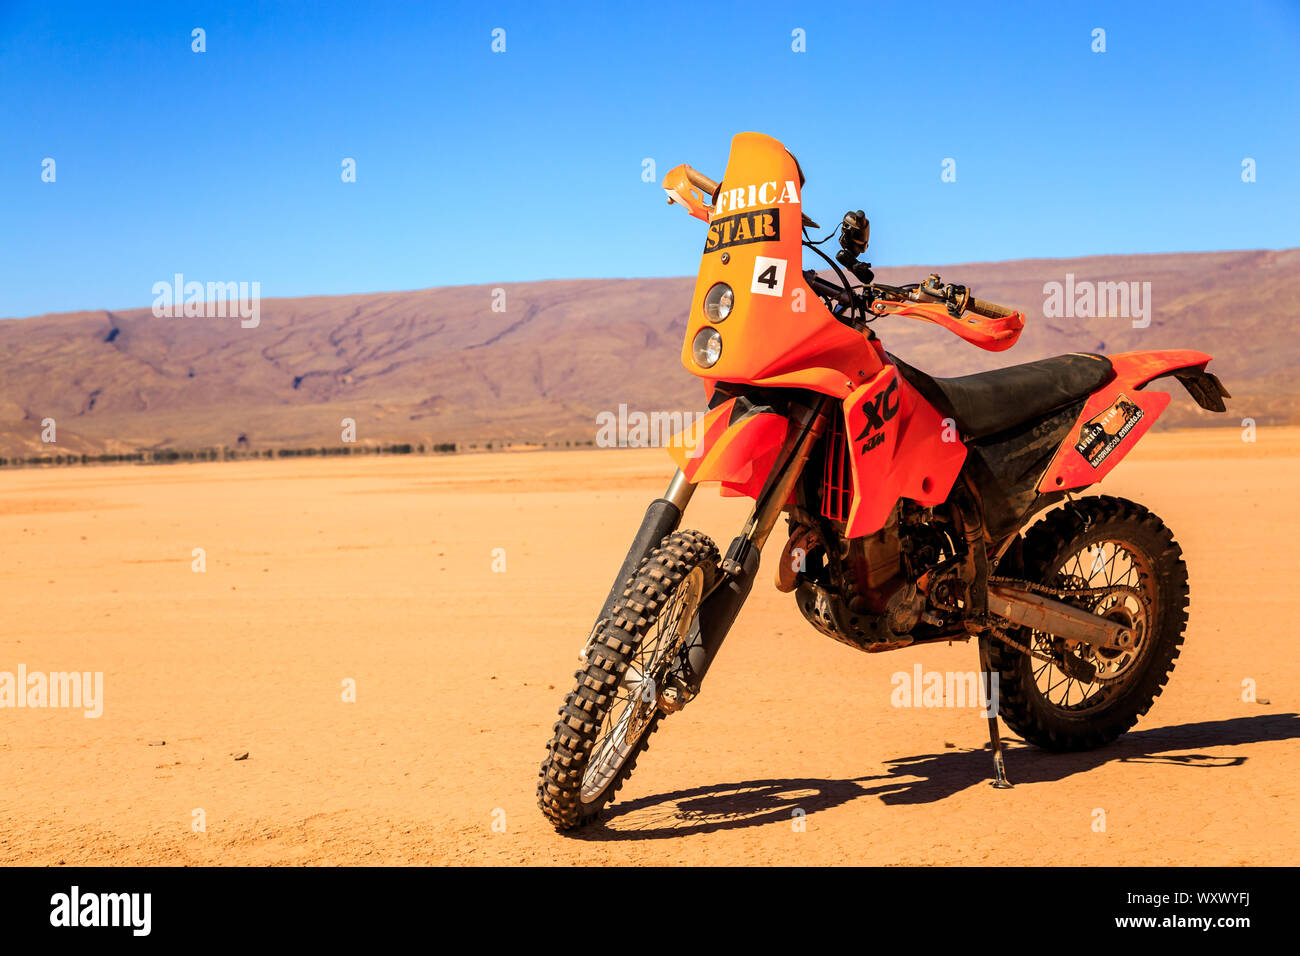 Merzouga, Morocco - February 22, 2016: A single orange motorbike sits alone  on a flat stretch of sand in the Sahara desert under a blue sky with a lar  Stock Photo - Alamy